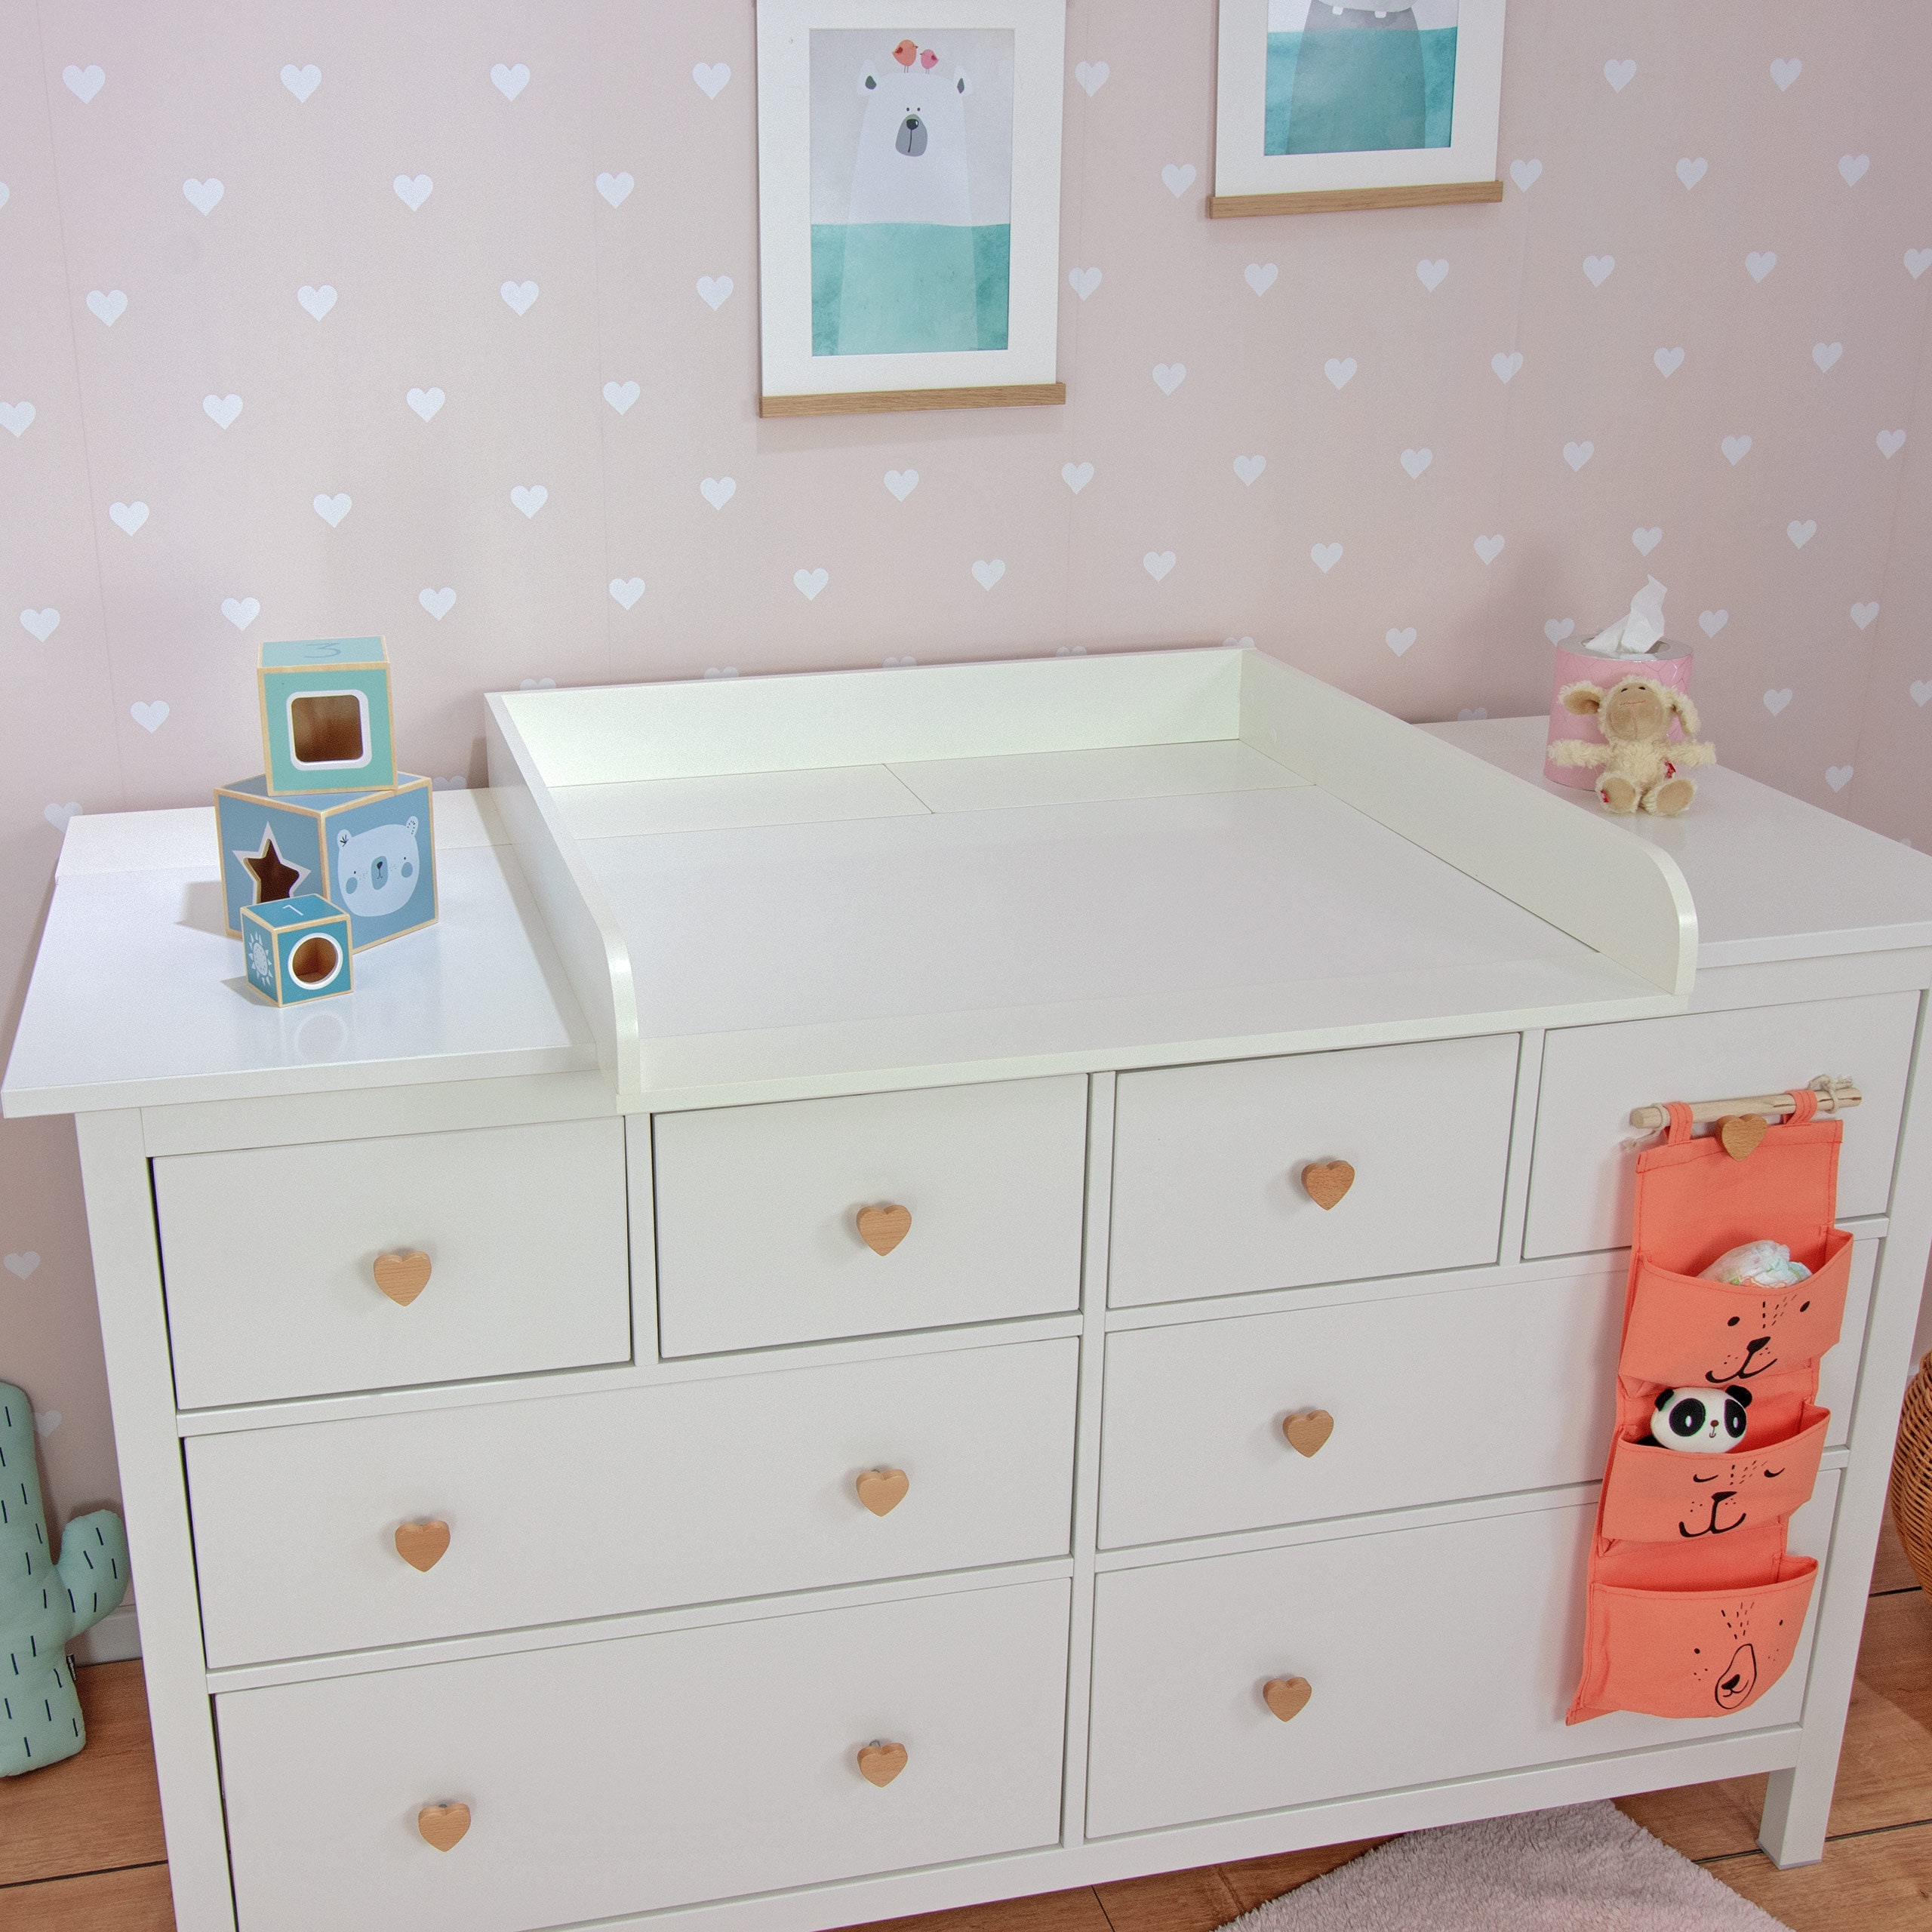 Puckdaddy Levi Changing Top, 160x80x10 Cm, Wooden Changing Top in White,  High Quality Changing Table Top Suitable for IKEA Hemnes Chests -  Hong  Kong